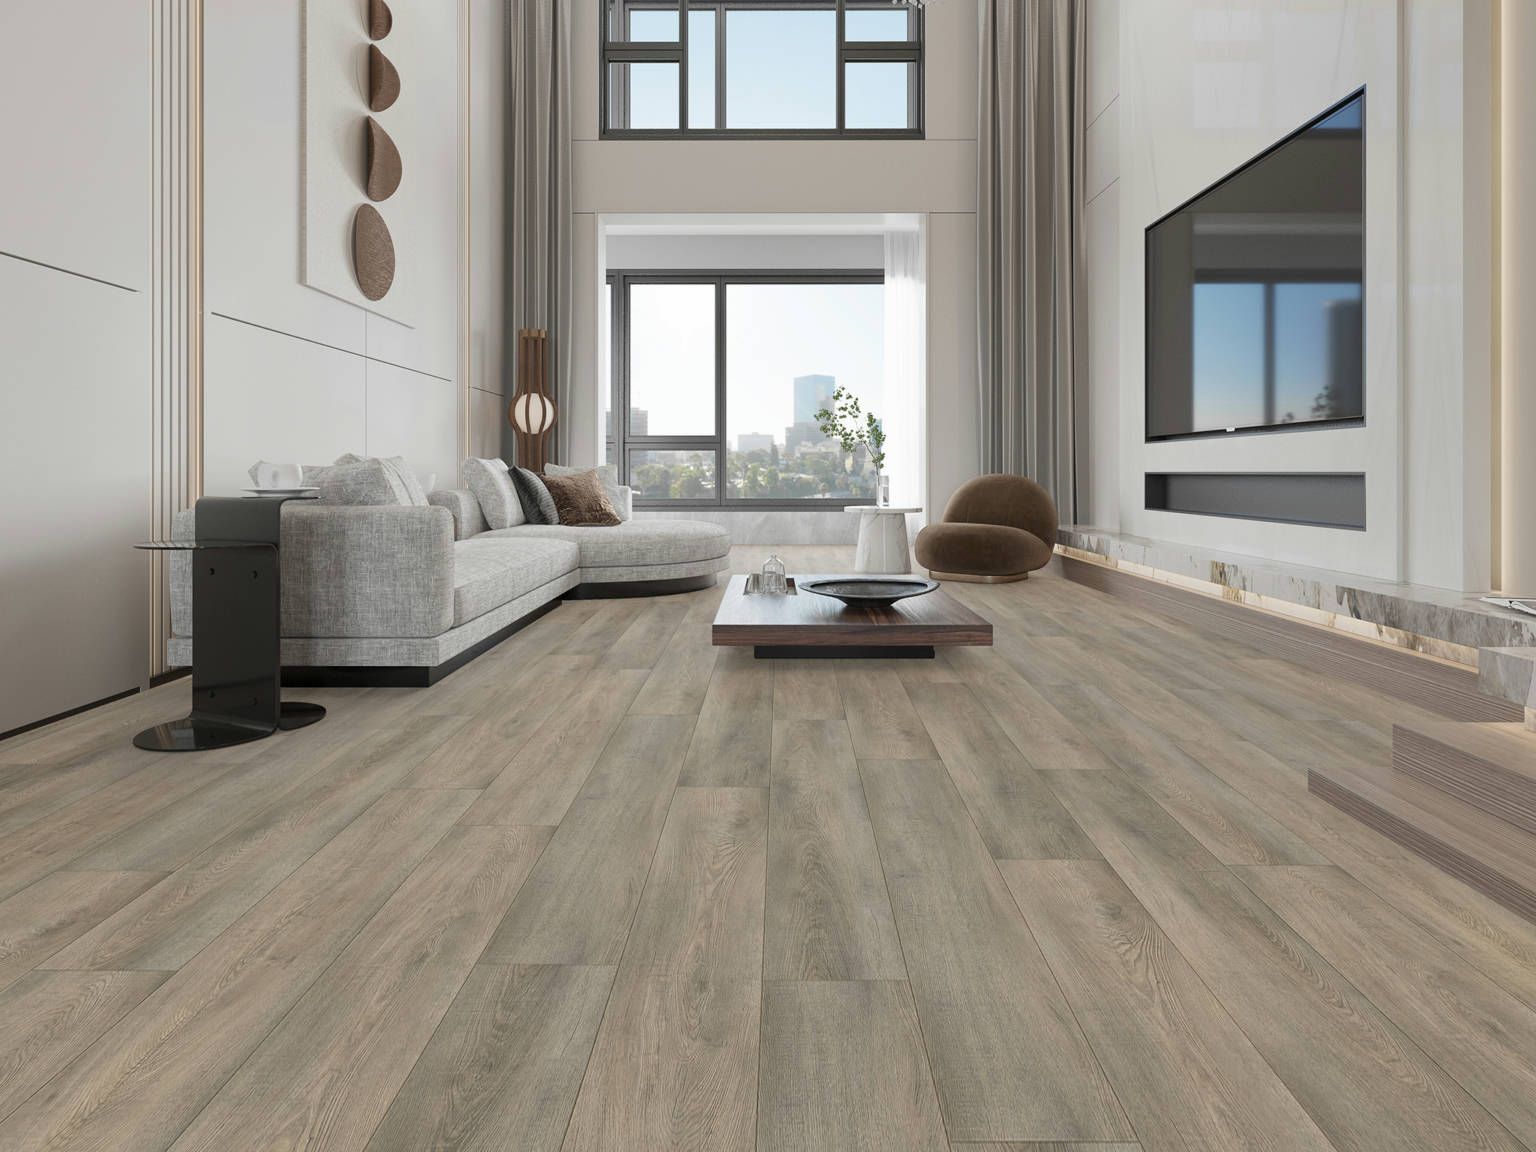 Timber Ridge Gold 20 2 | Qualis Ceramica | Luxury Tile and Vinyl at affordable prices